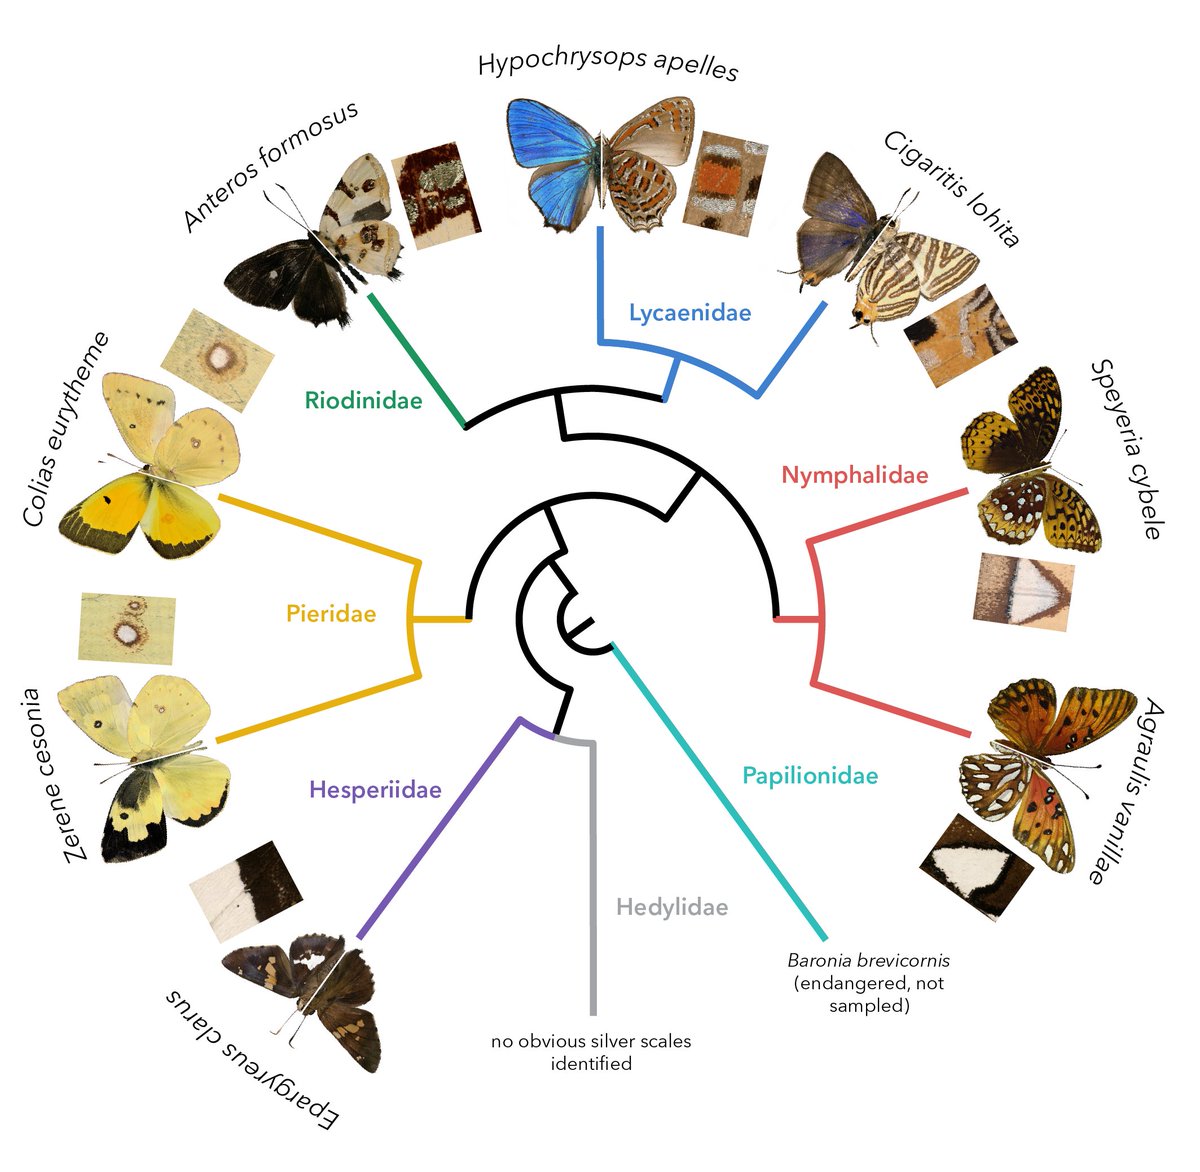 2/n How do butterflies make silver and gold? How is it so widespread across different butterfly families? We studied 7 species from 5 butterfly families